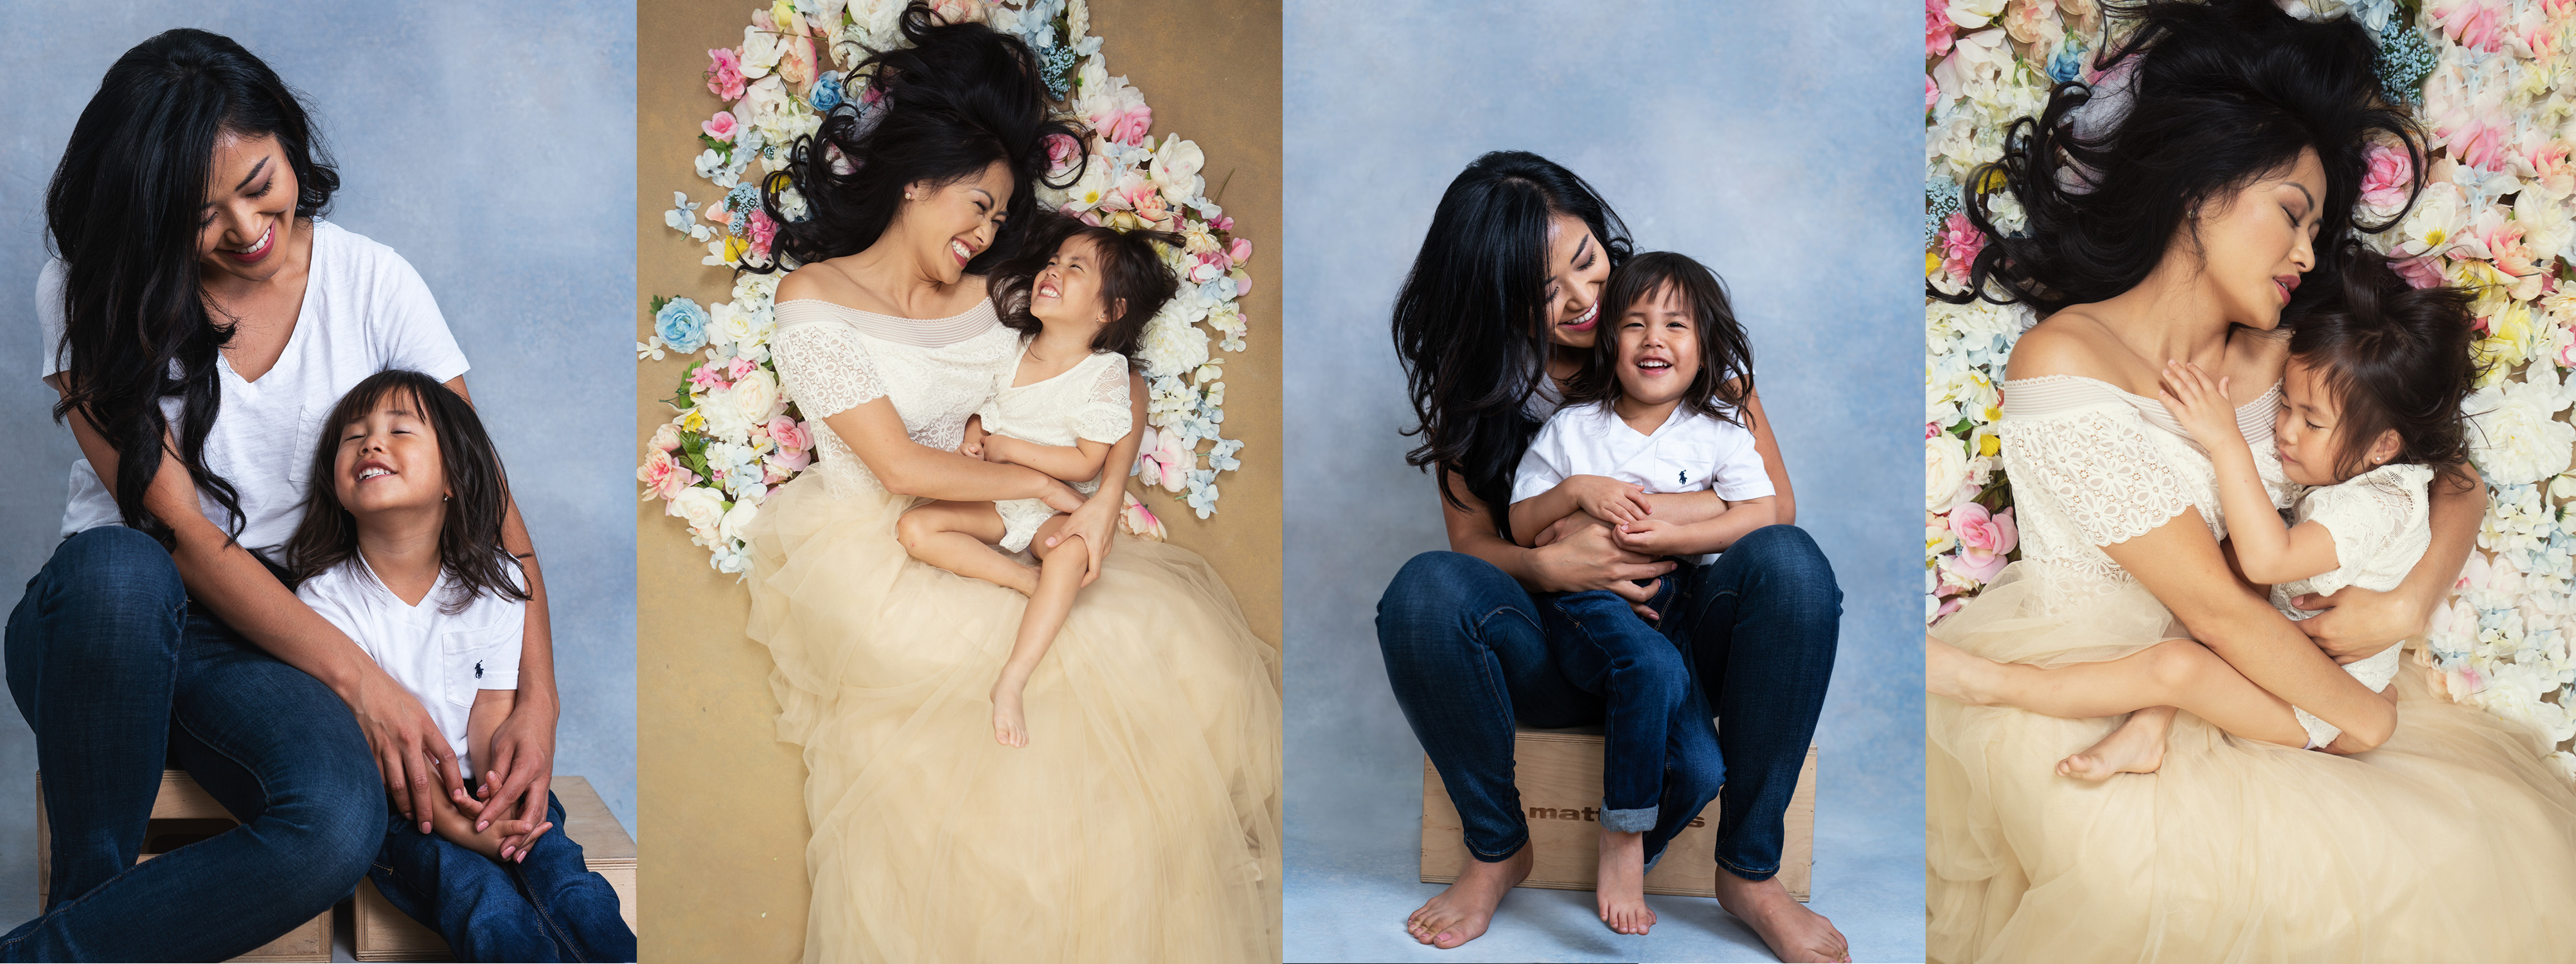 andy hemming share mother daughters photoshoot photos